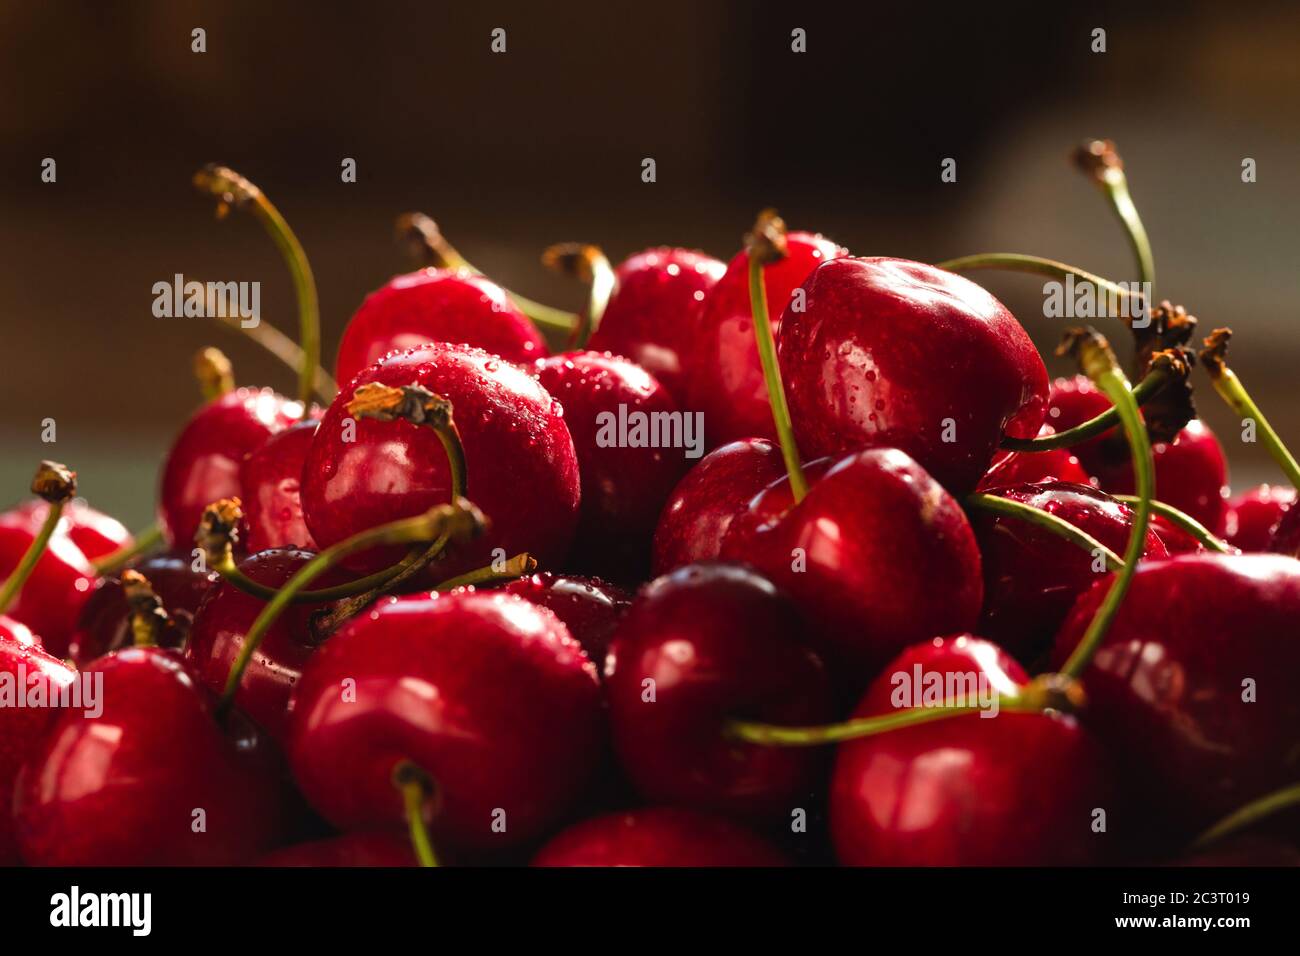 Angle view on ripe sweet cherries in backlight. Stock Photo